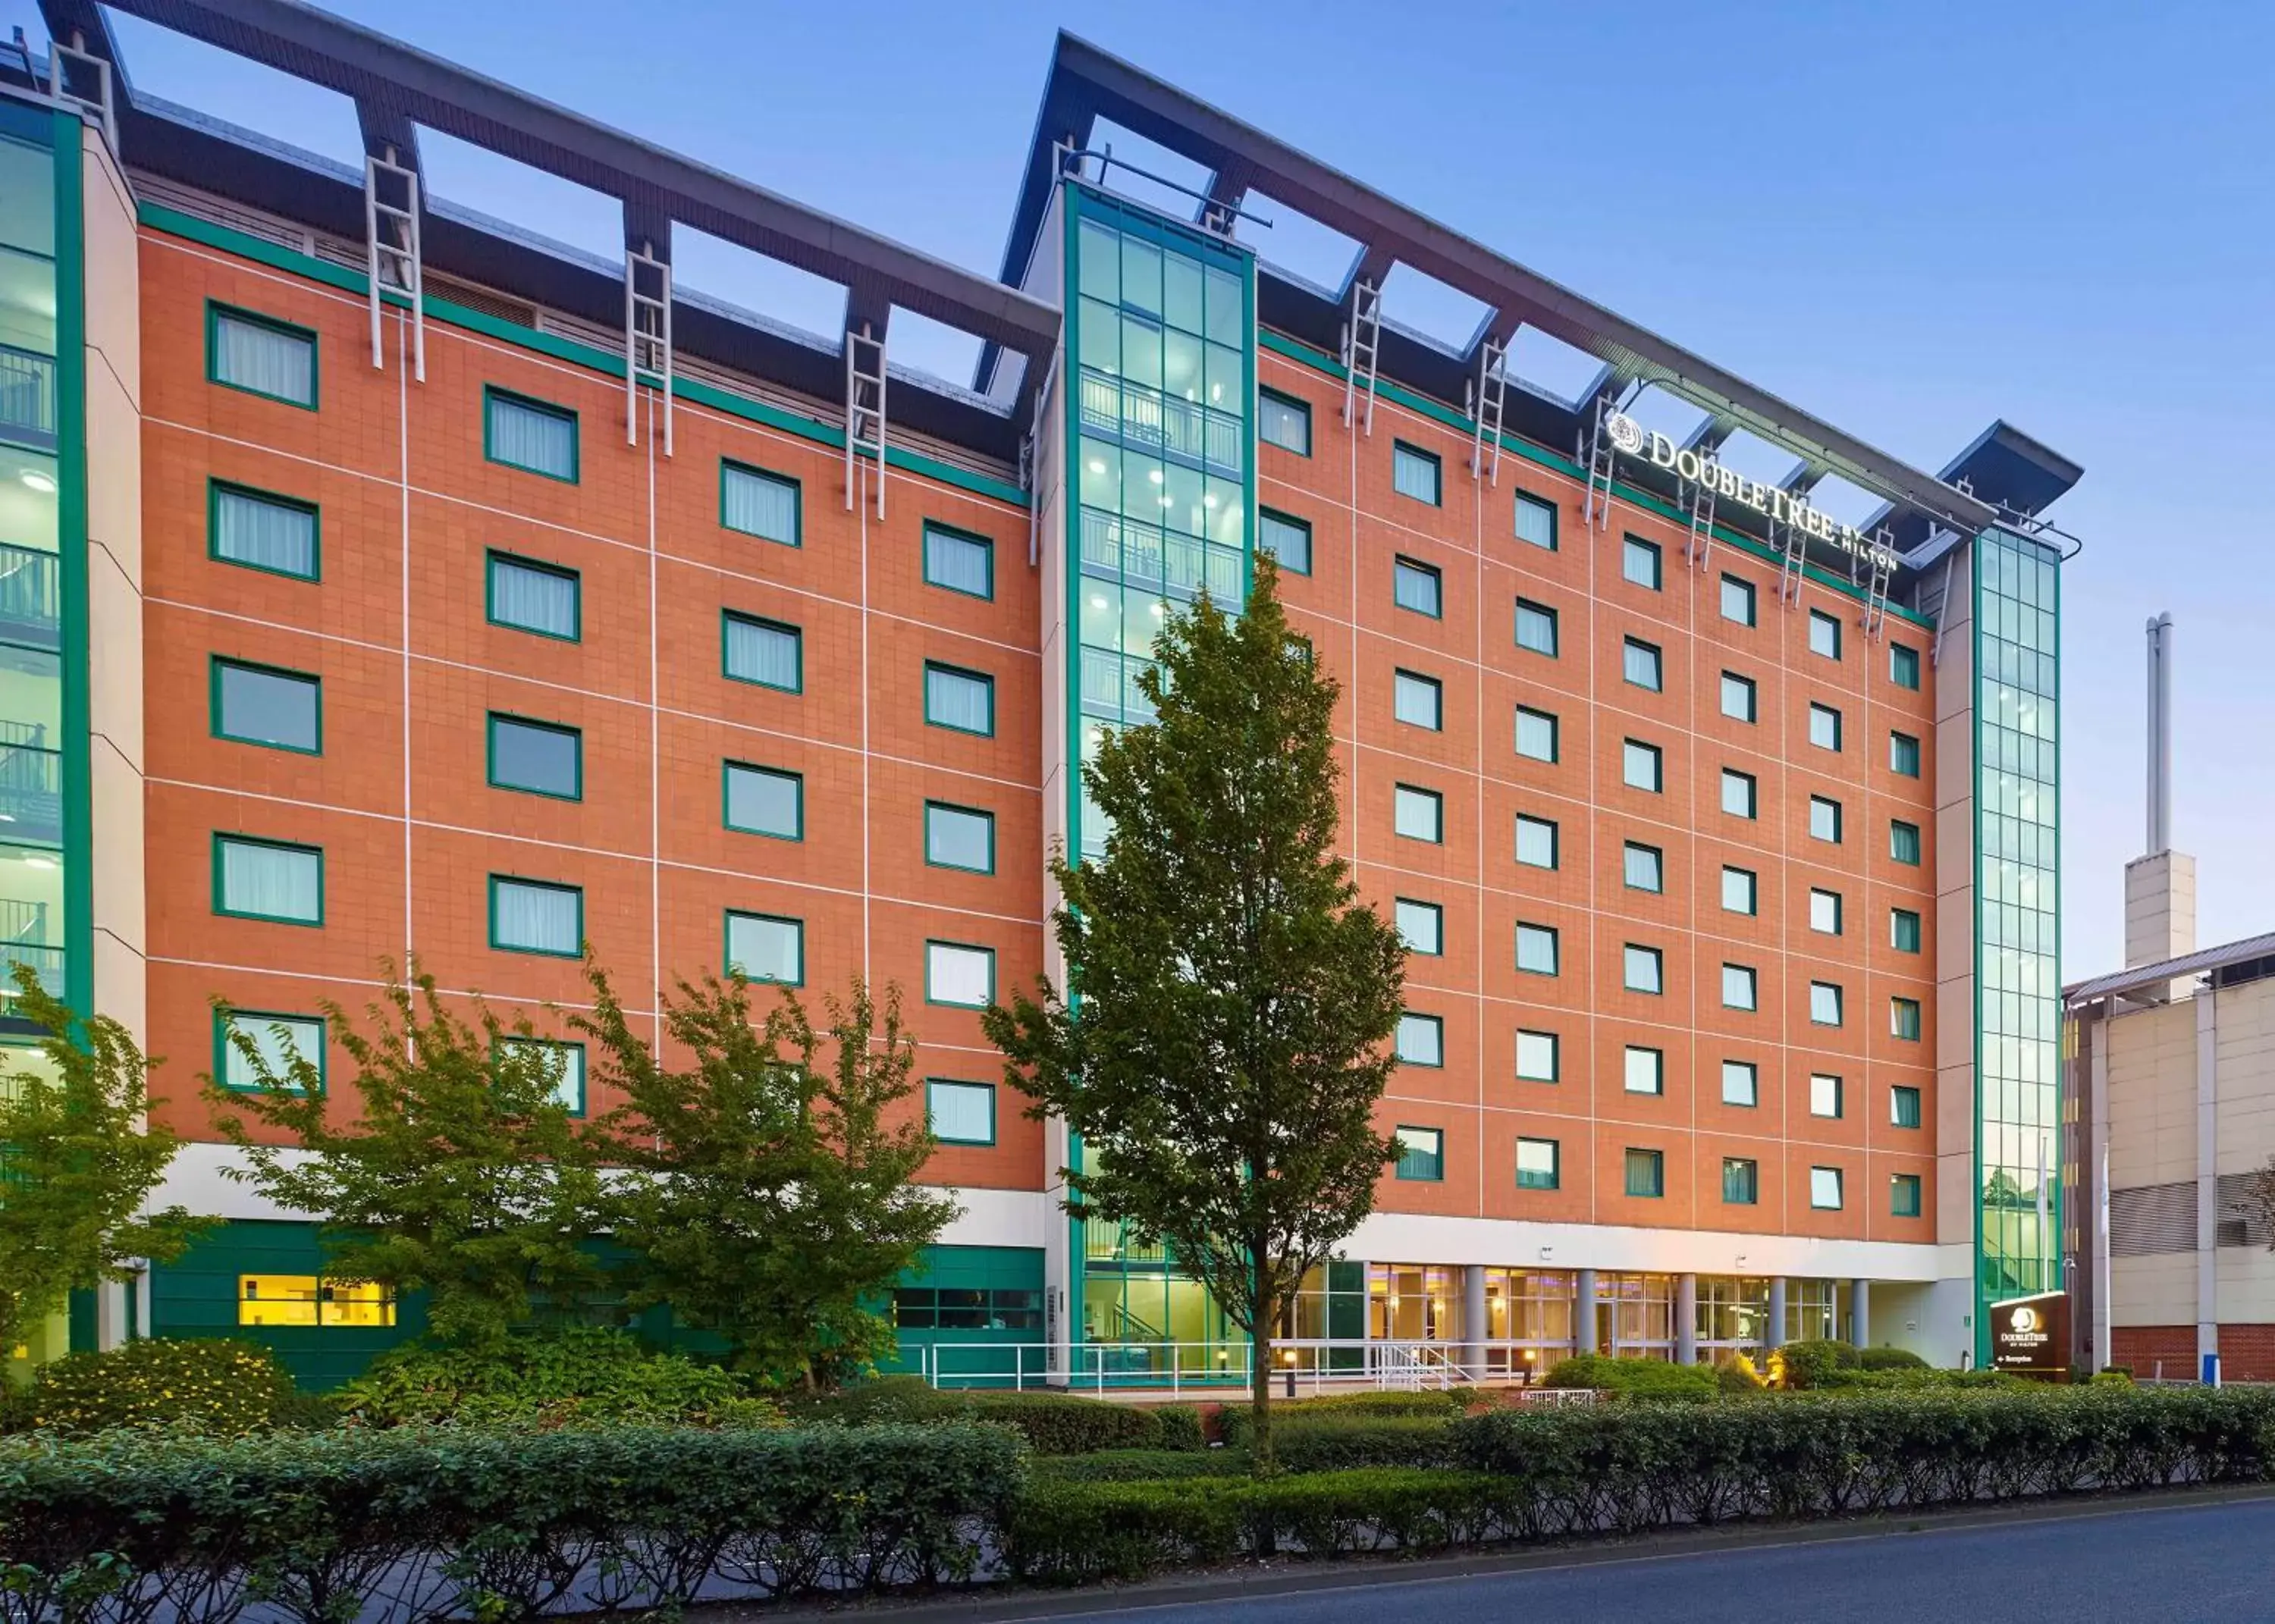 Property Building in DoubleTree by Hilton Woking